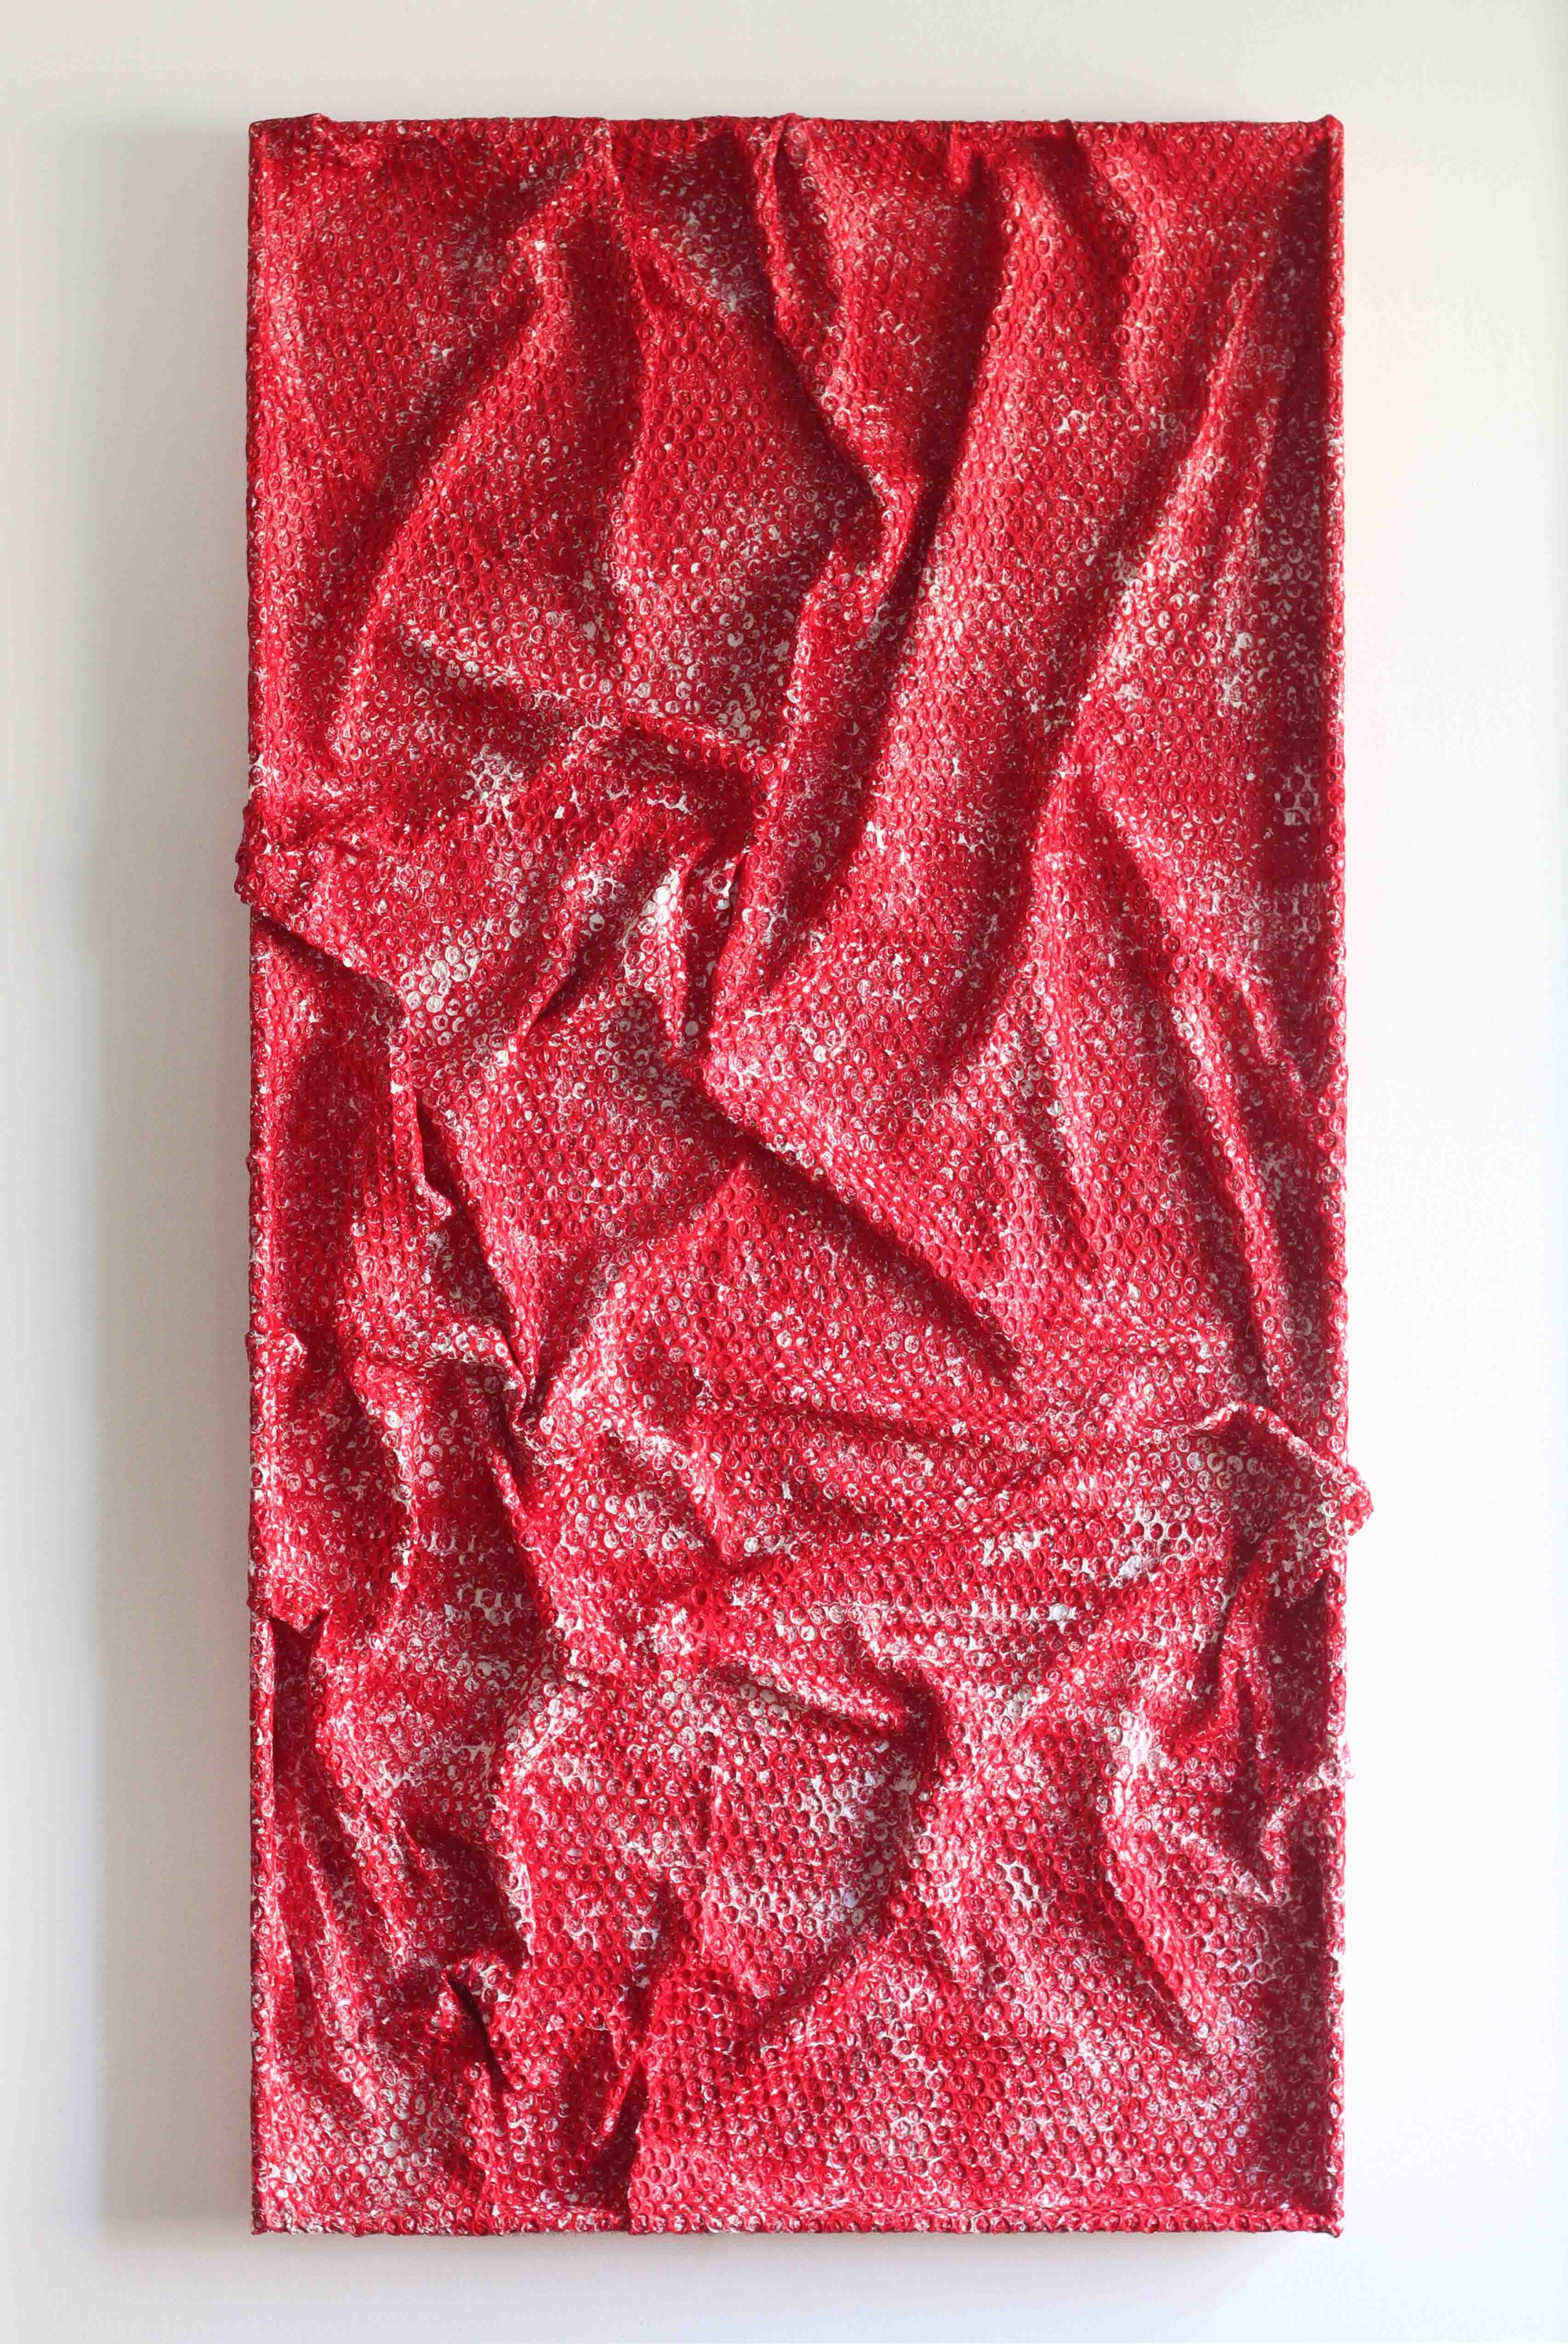 ROBB_LEVI_RED APRIL_CAST ACRYLIC AND ROAD GLASS ON POPLAR_24X48IN_2020_small.jpg